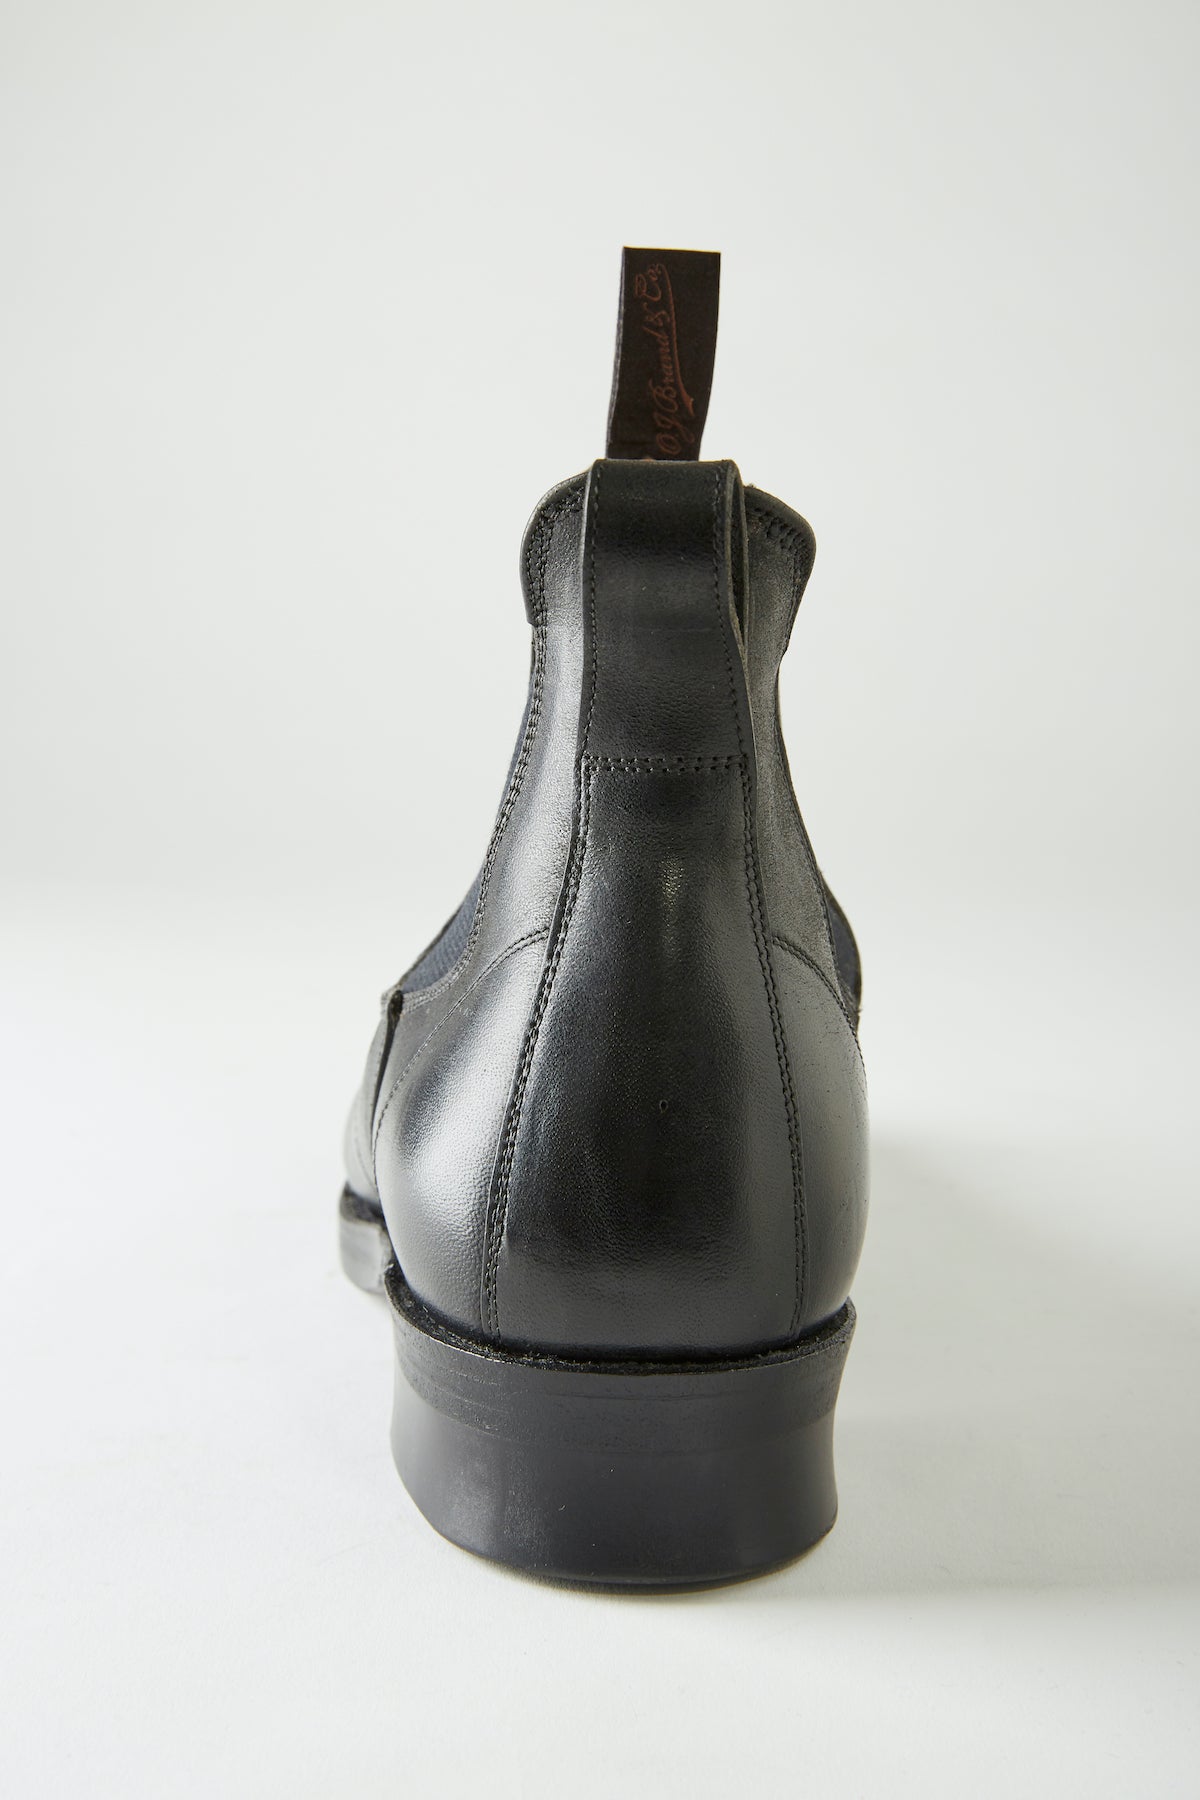 "The Rover" ARTISAN LEATHER SIDE-GORE BOOTS - 222OJ-FW02